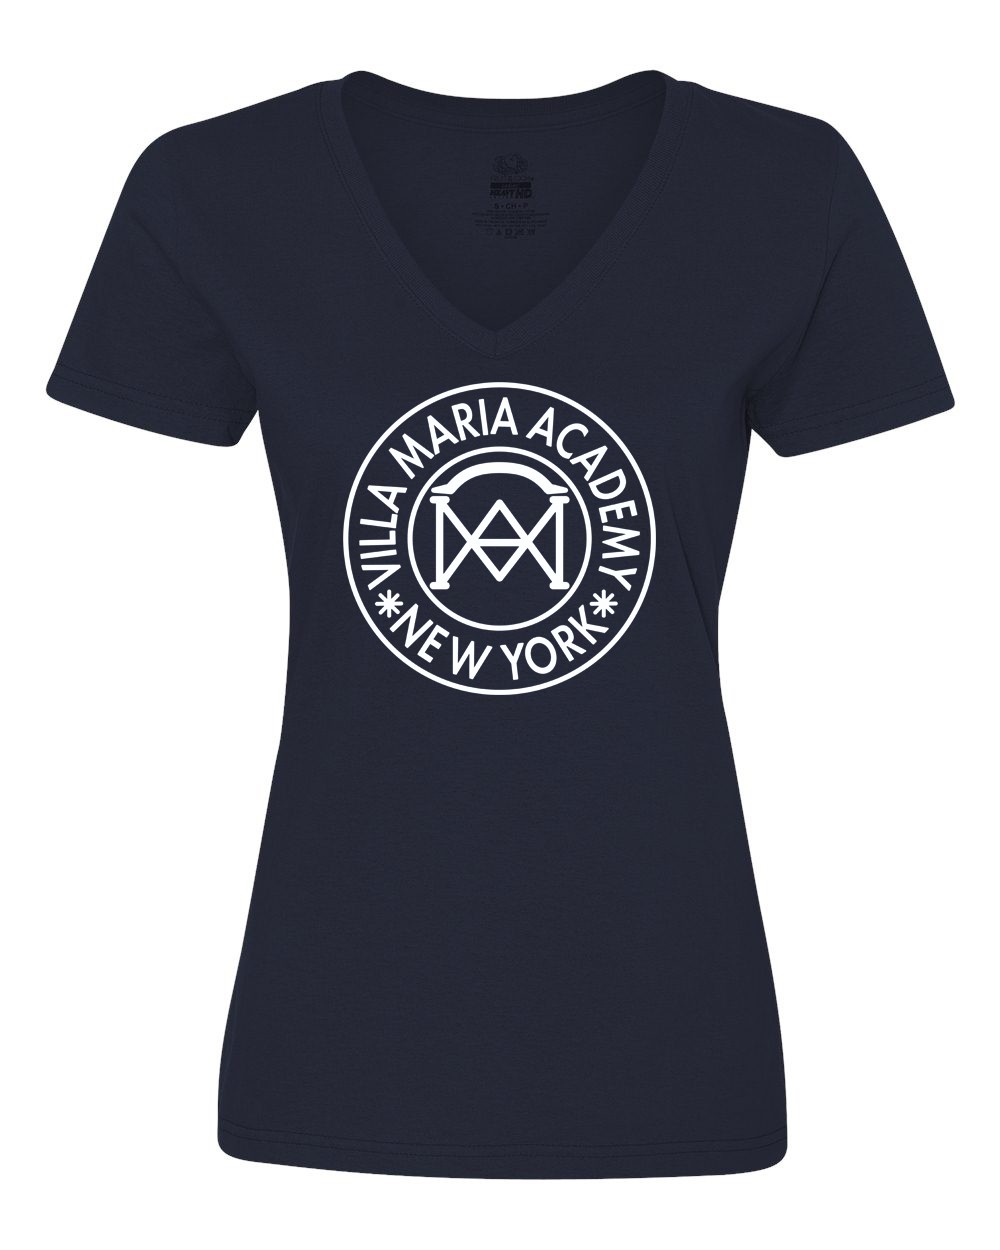 VMA STAFF S/S Women's V-Neck T-Shirt - Please Allow 2-3 Weeks for Delivery